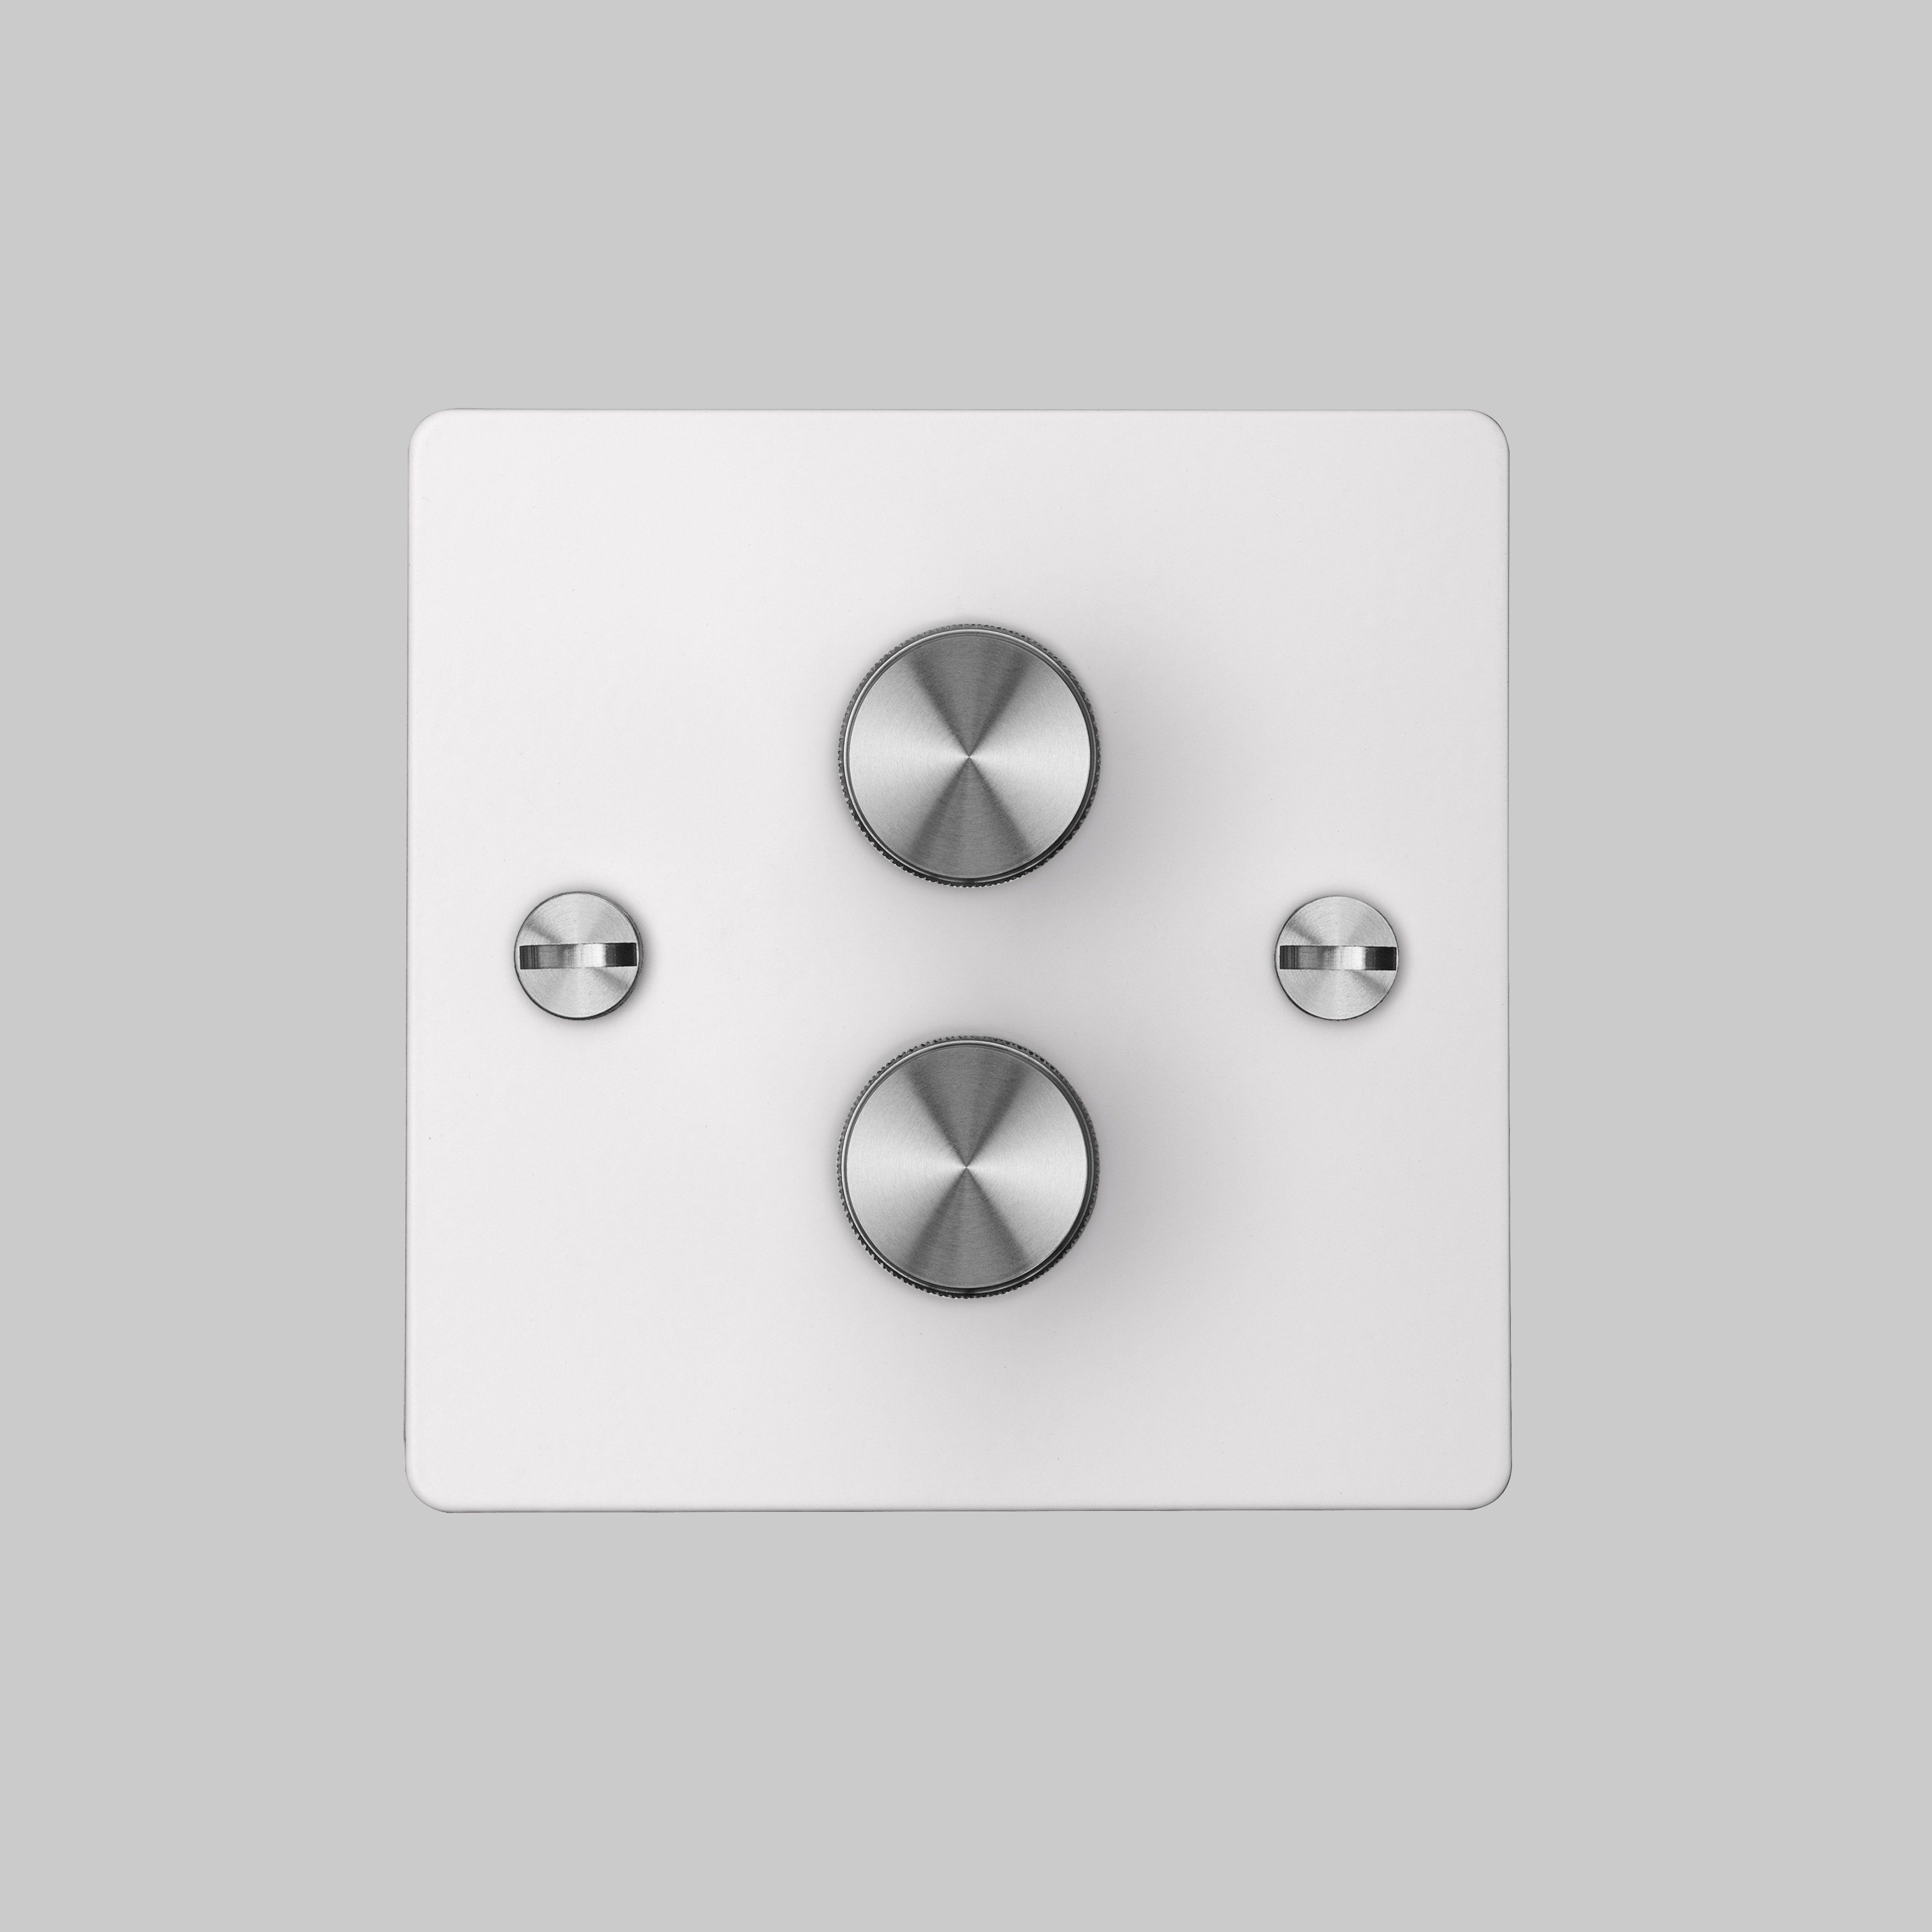 Buster and Punch 2G DIMMER / WHITE / STEEL